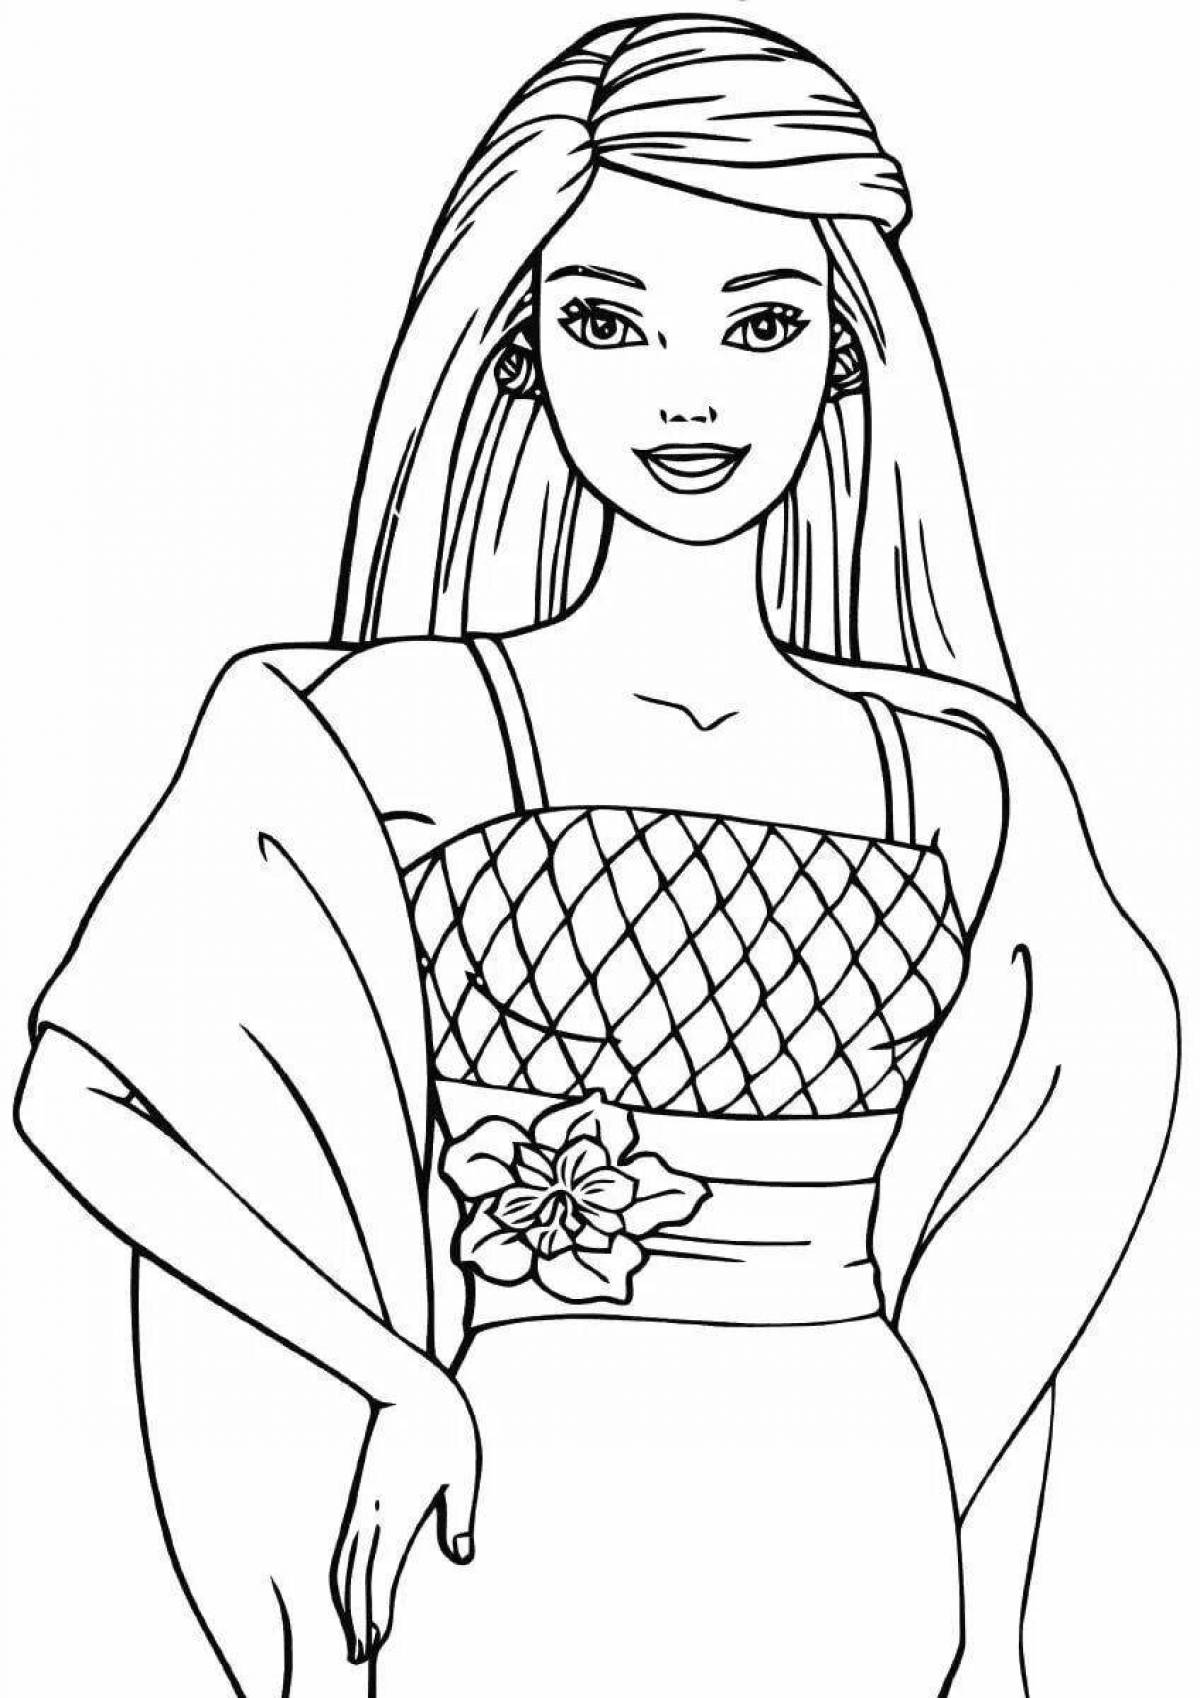 Coloring pages for girls 8 years old